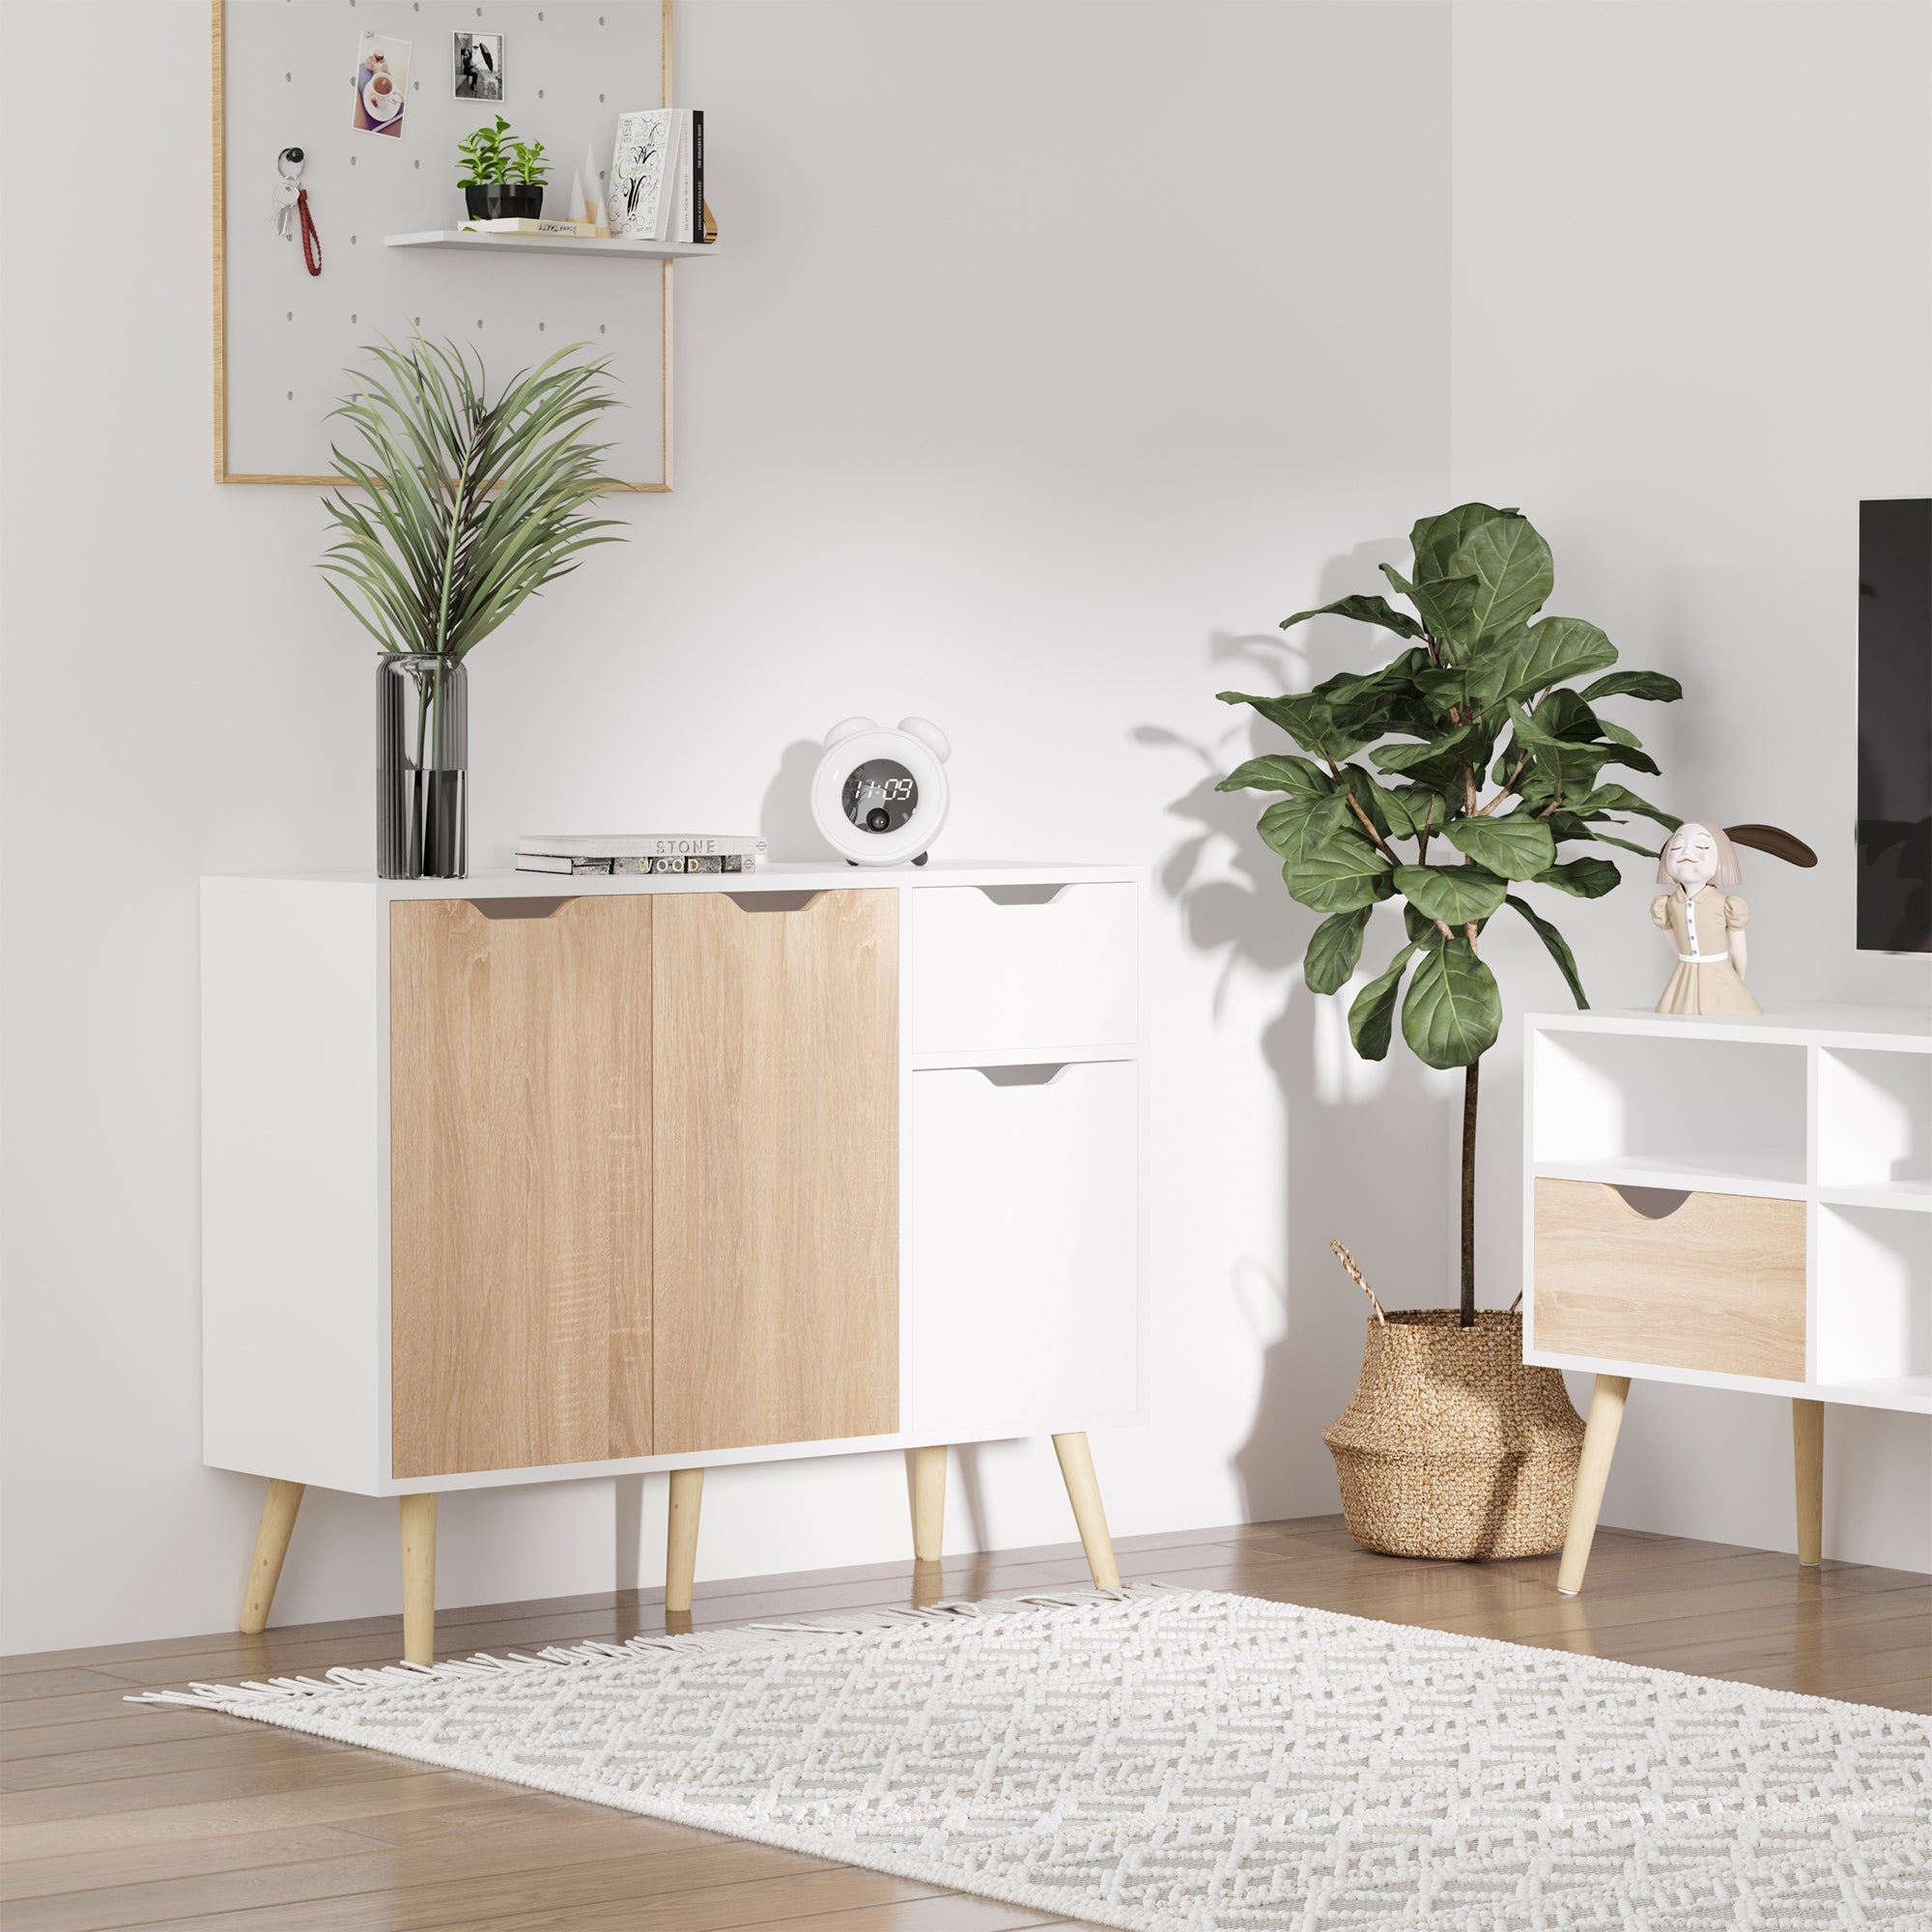 HOMCOM Sideboard Floor Standing Storage Cabinet with Drawer for Bedroom, Living Room, Home Office, Natural - TovaHaus